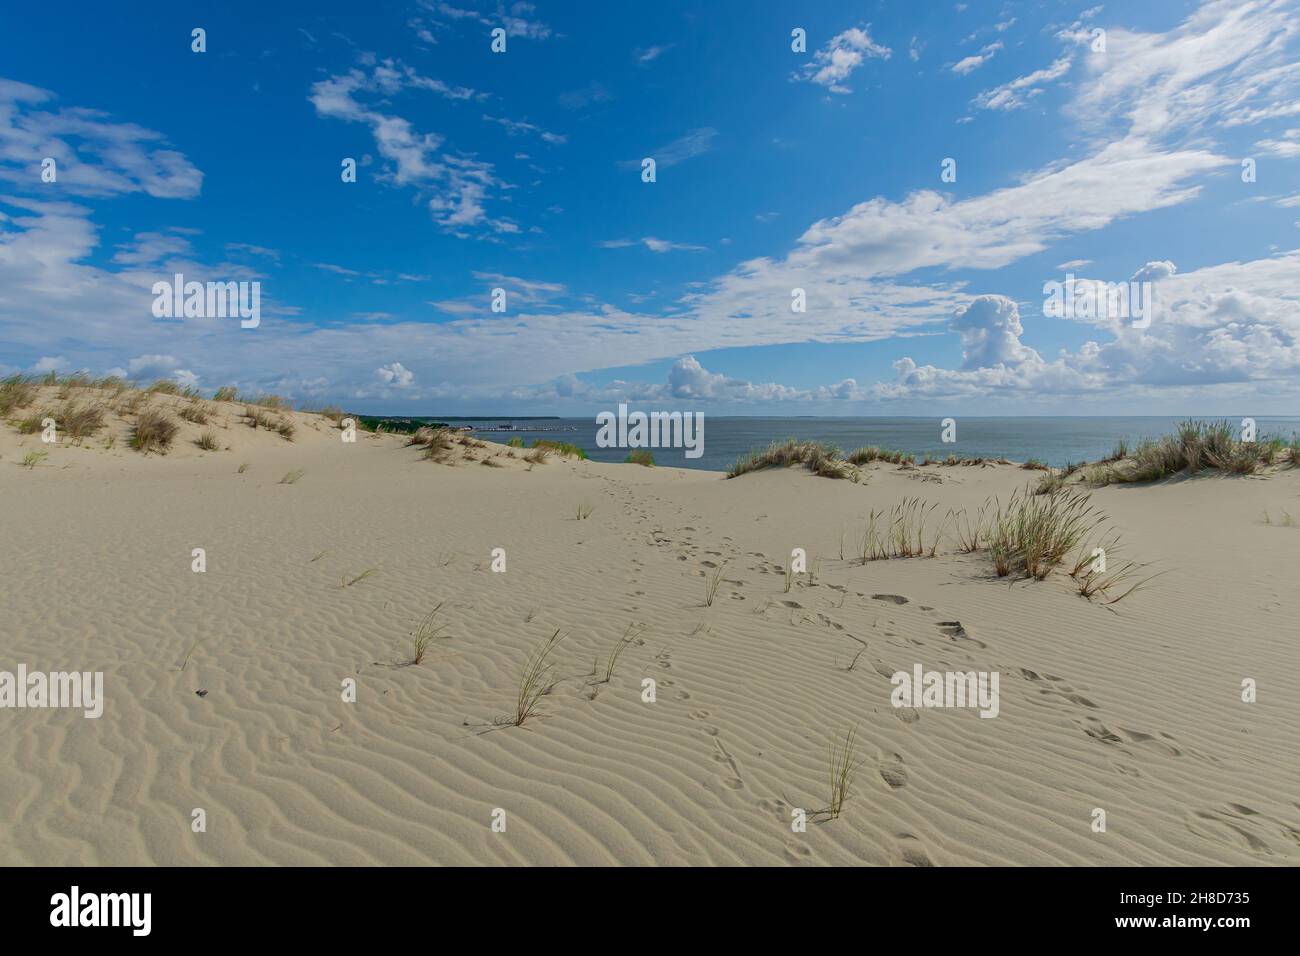 Panorama of dunes, Nida - Curonian Spit and Curonian Lagoon, Baltic dunes. UNESCO Heritage. Nida is located on the Curonian Spit. Stock Photo